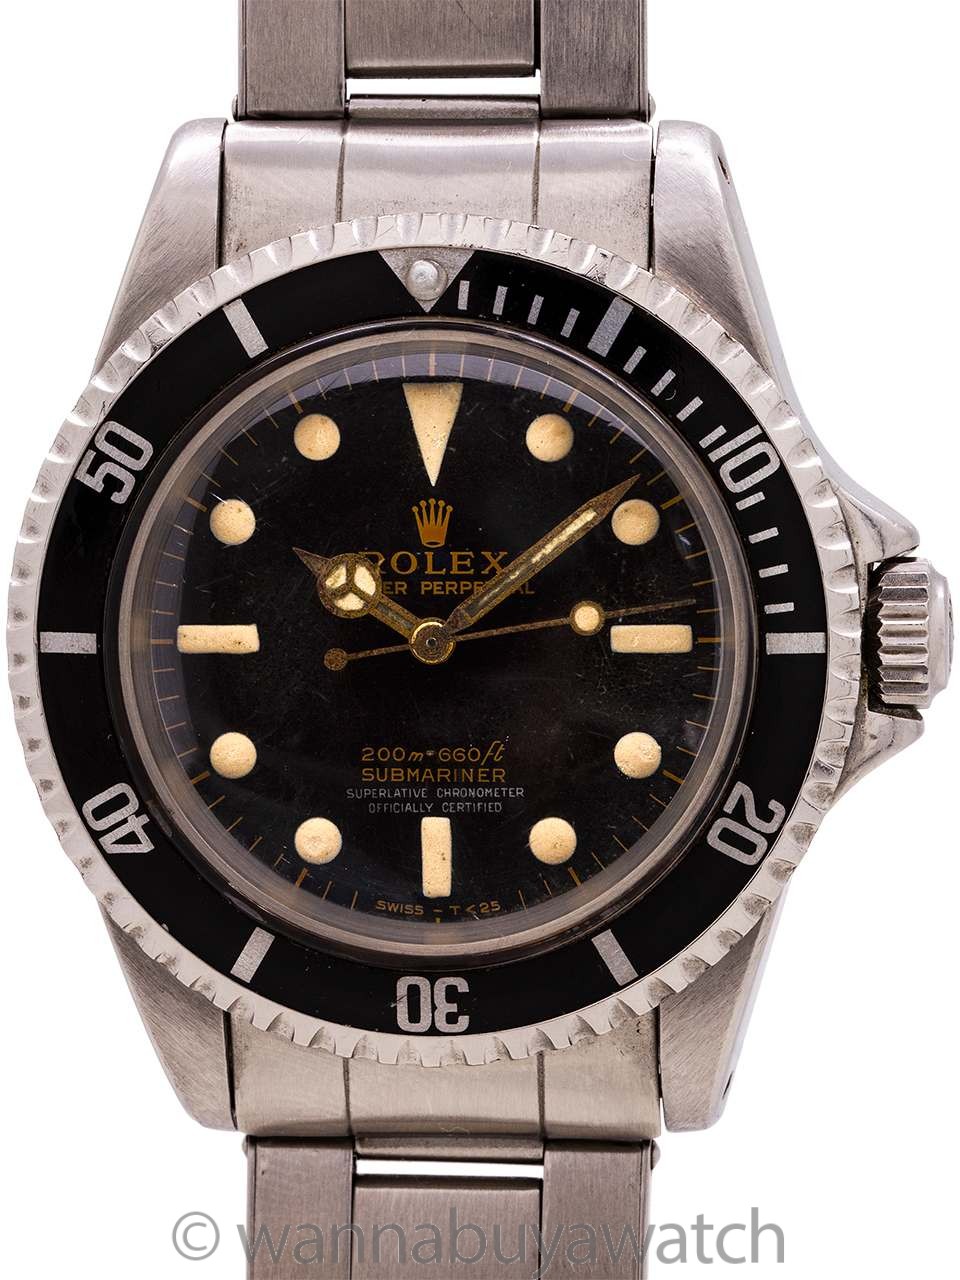 Rolex Submariner Ref. 5512/5513 Stainless Steel, Automatic, with